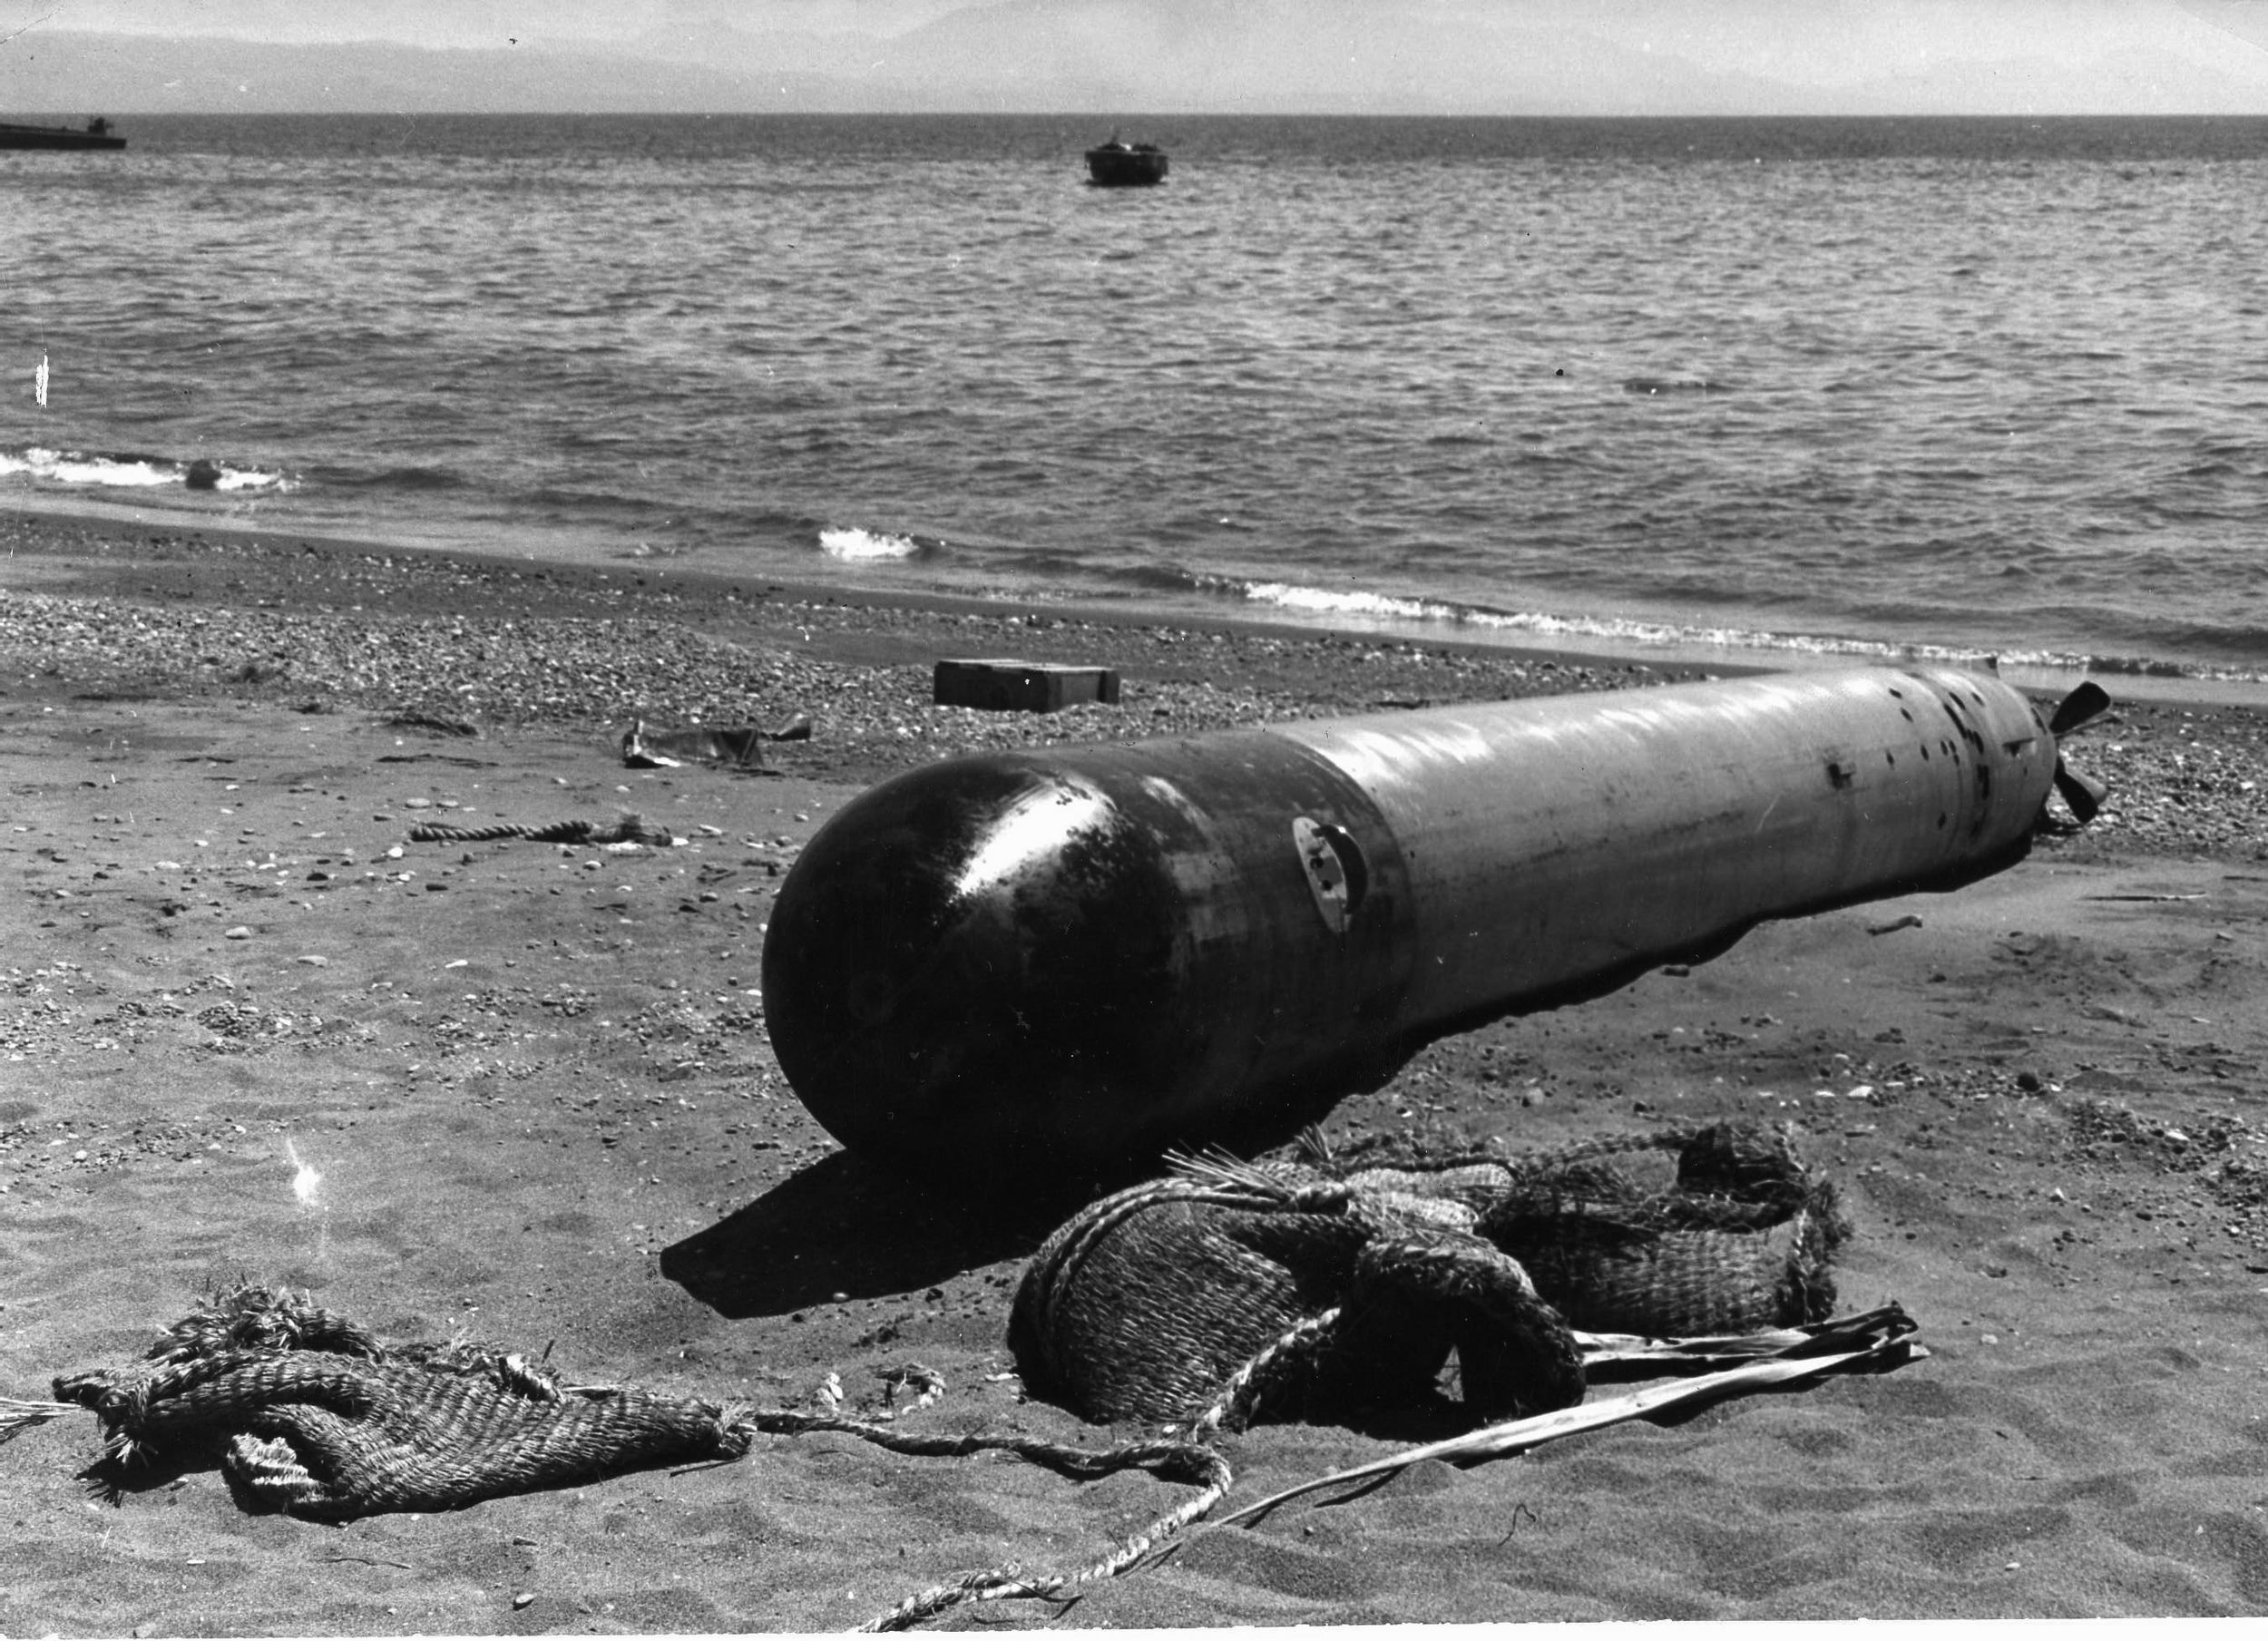 Apparently fired by a Japanese submarine under attack by U.S. forces, this Japanese torpedo failed to find a target or to explode and came to rest on the beach near the entrance to a U.S. naval facility at Guadalcanal.